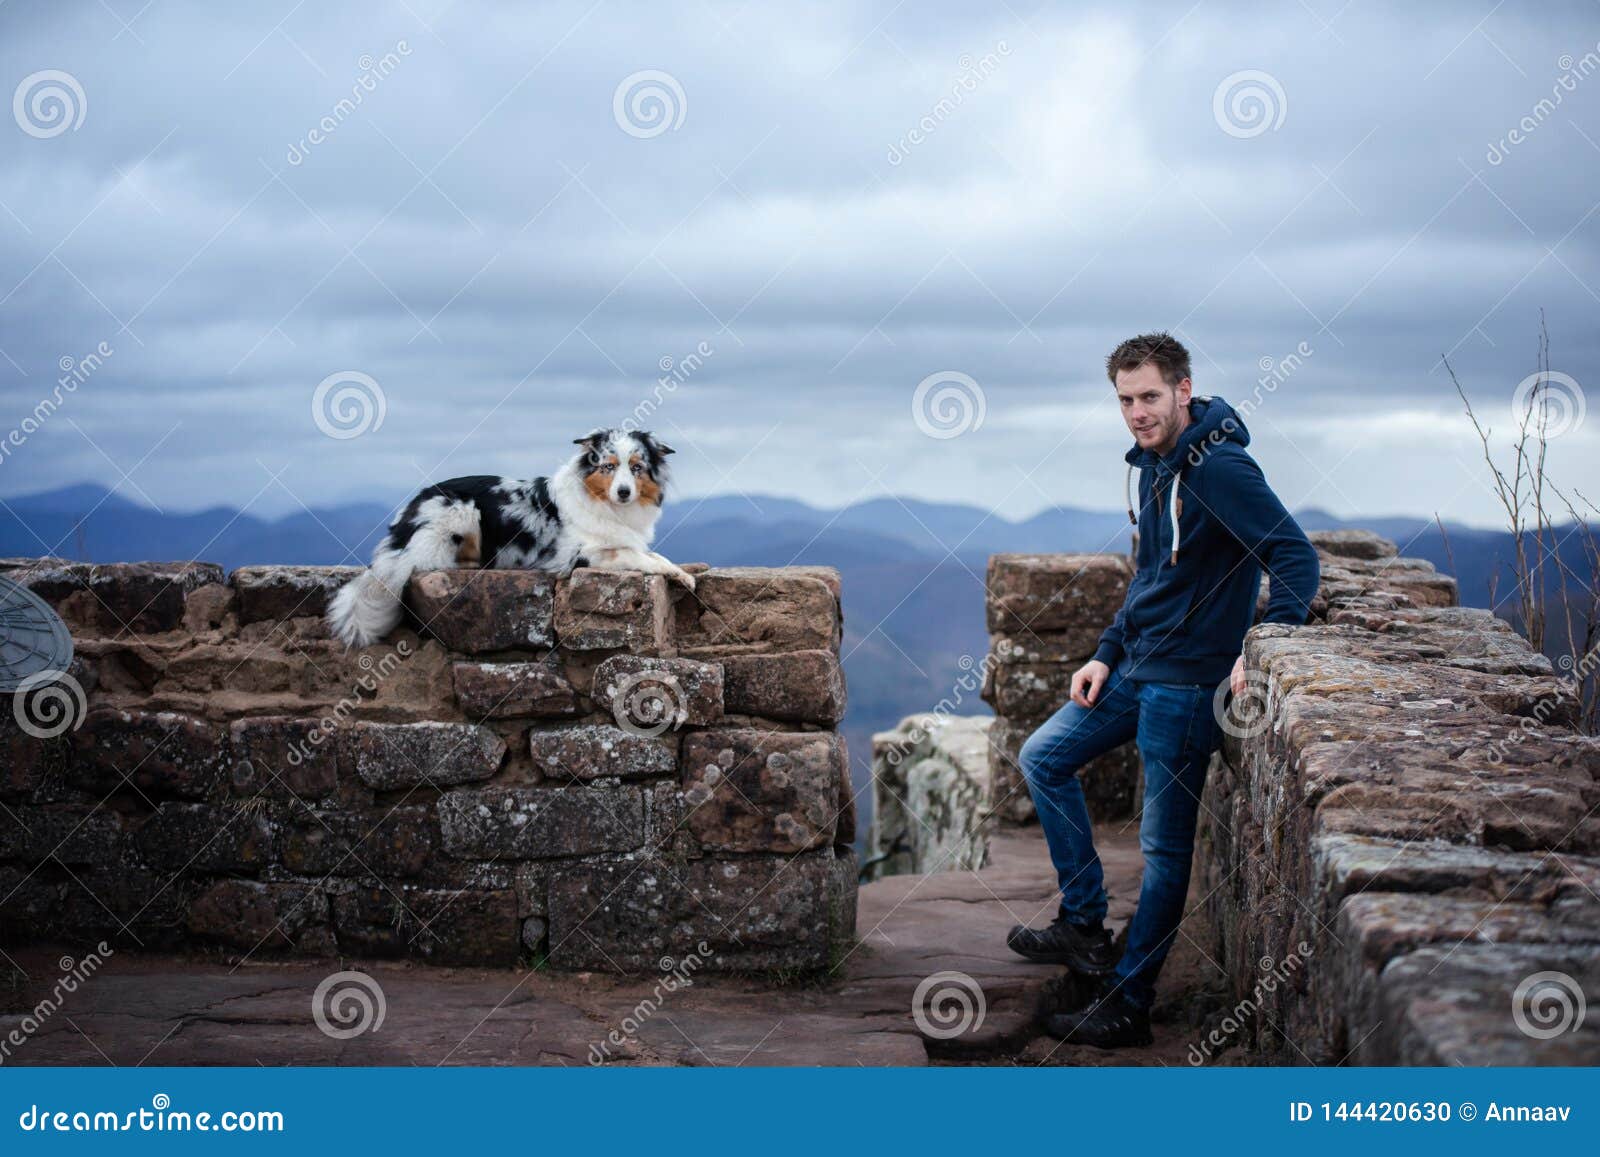 Man and Dog Travel . Pet and His Friend in Nature. Australian Shepherd and Its Owner Stock Photo - Image happy, entrance: 144420630